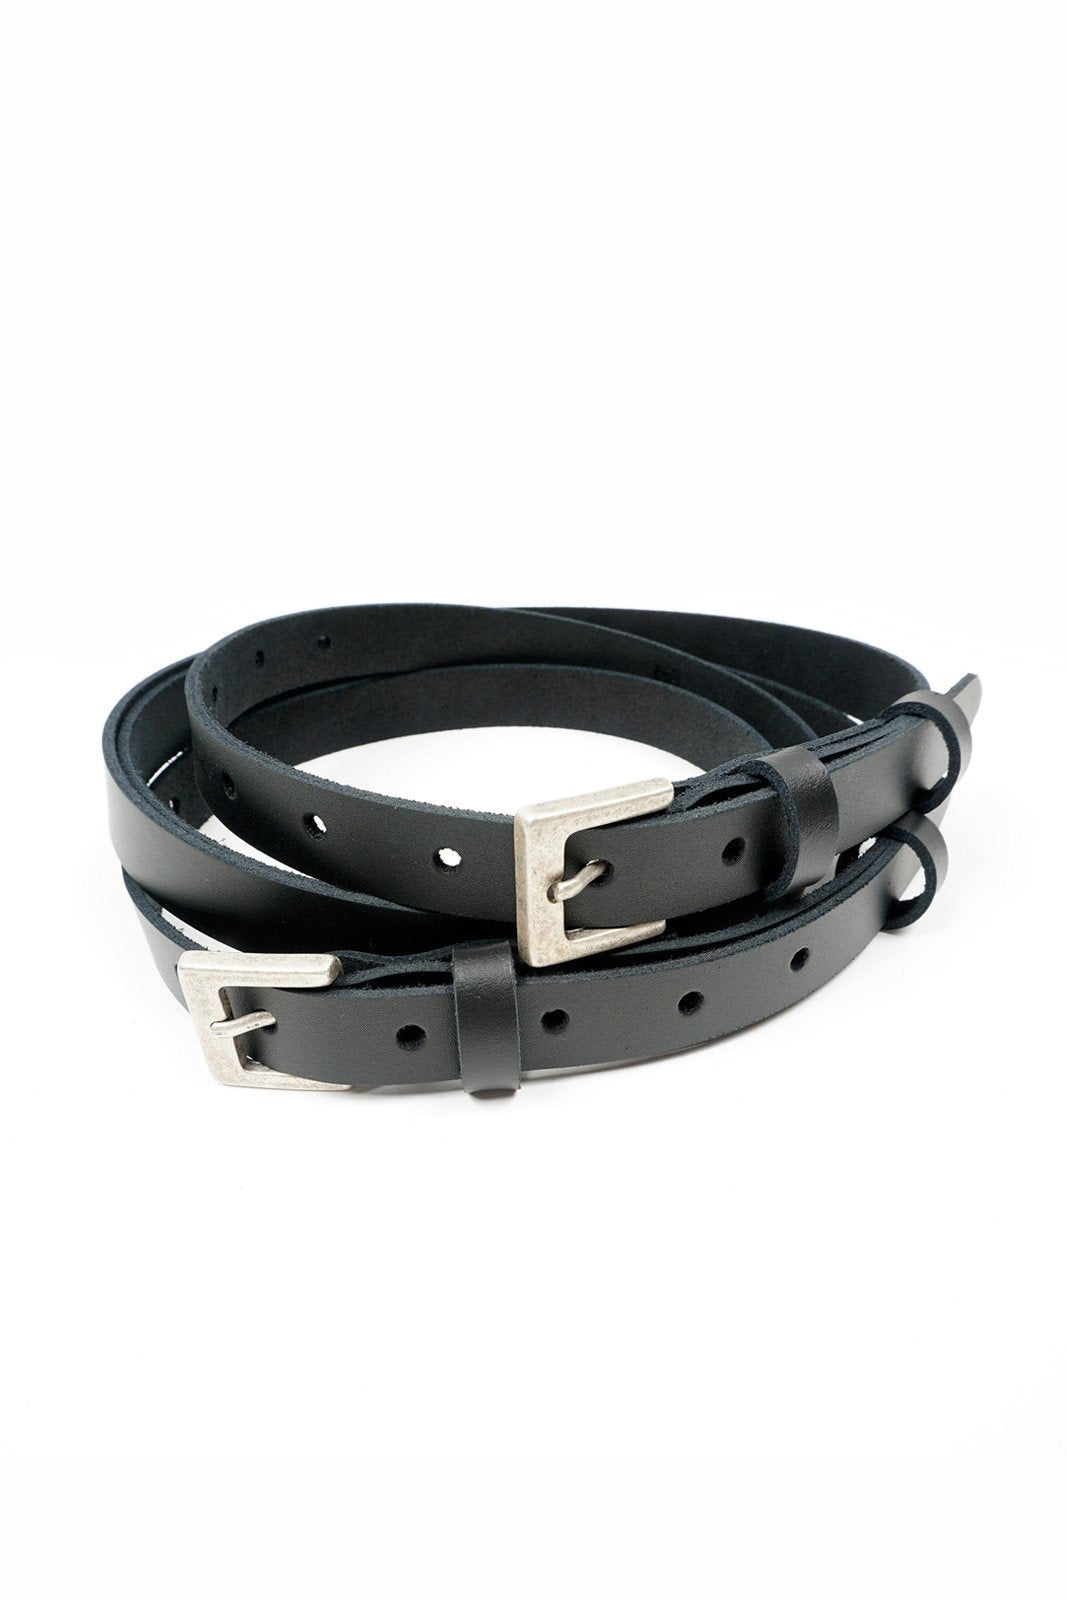 Double leather belt, g-500